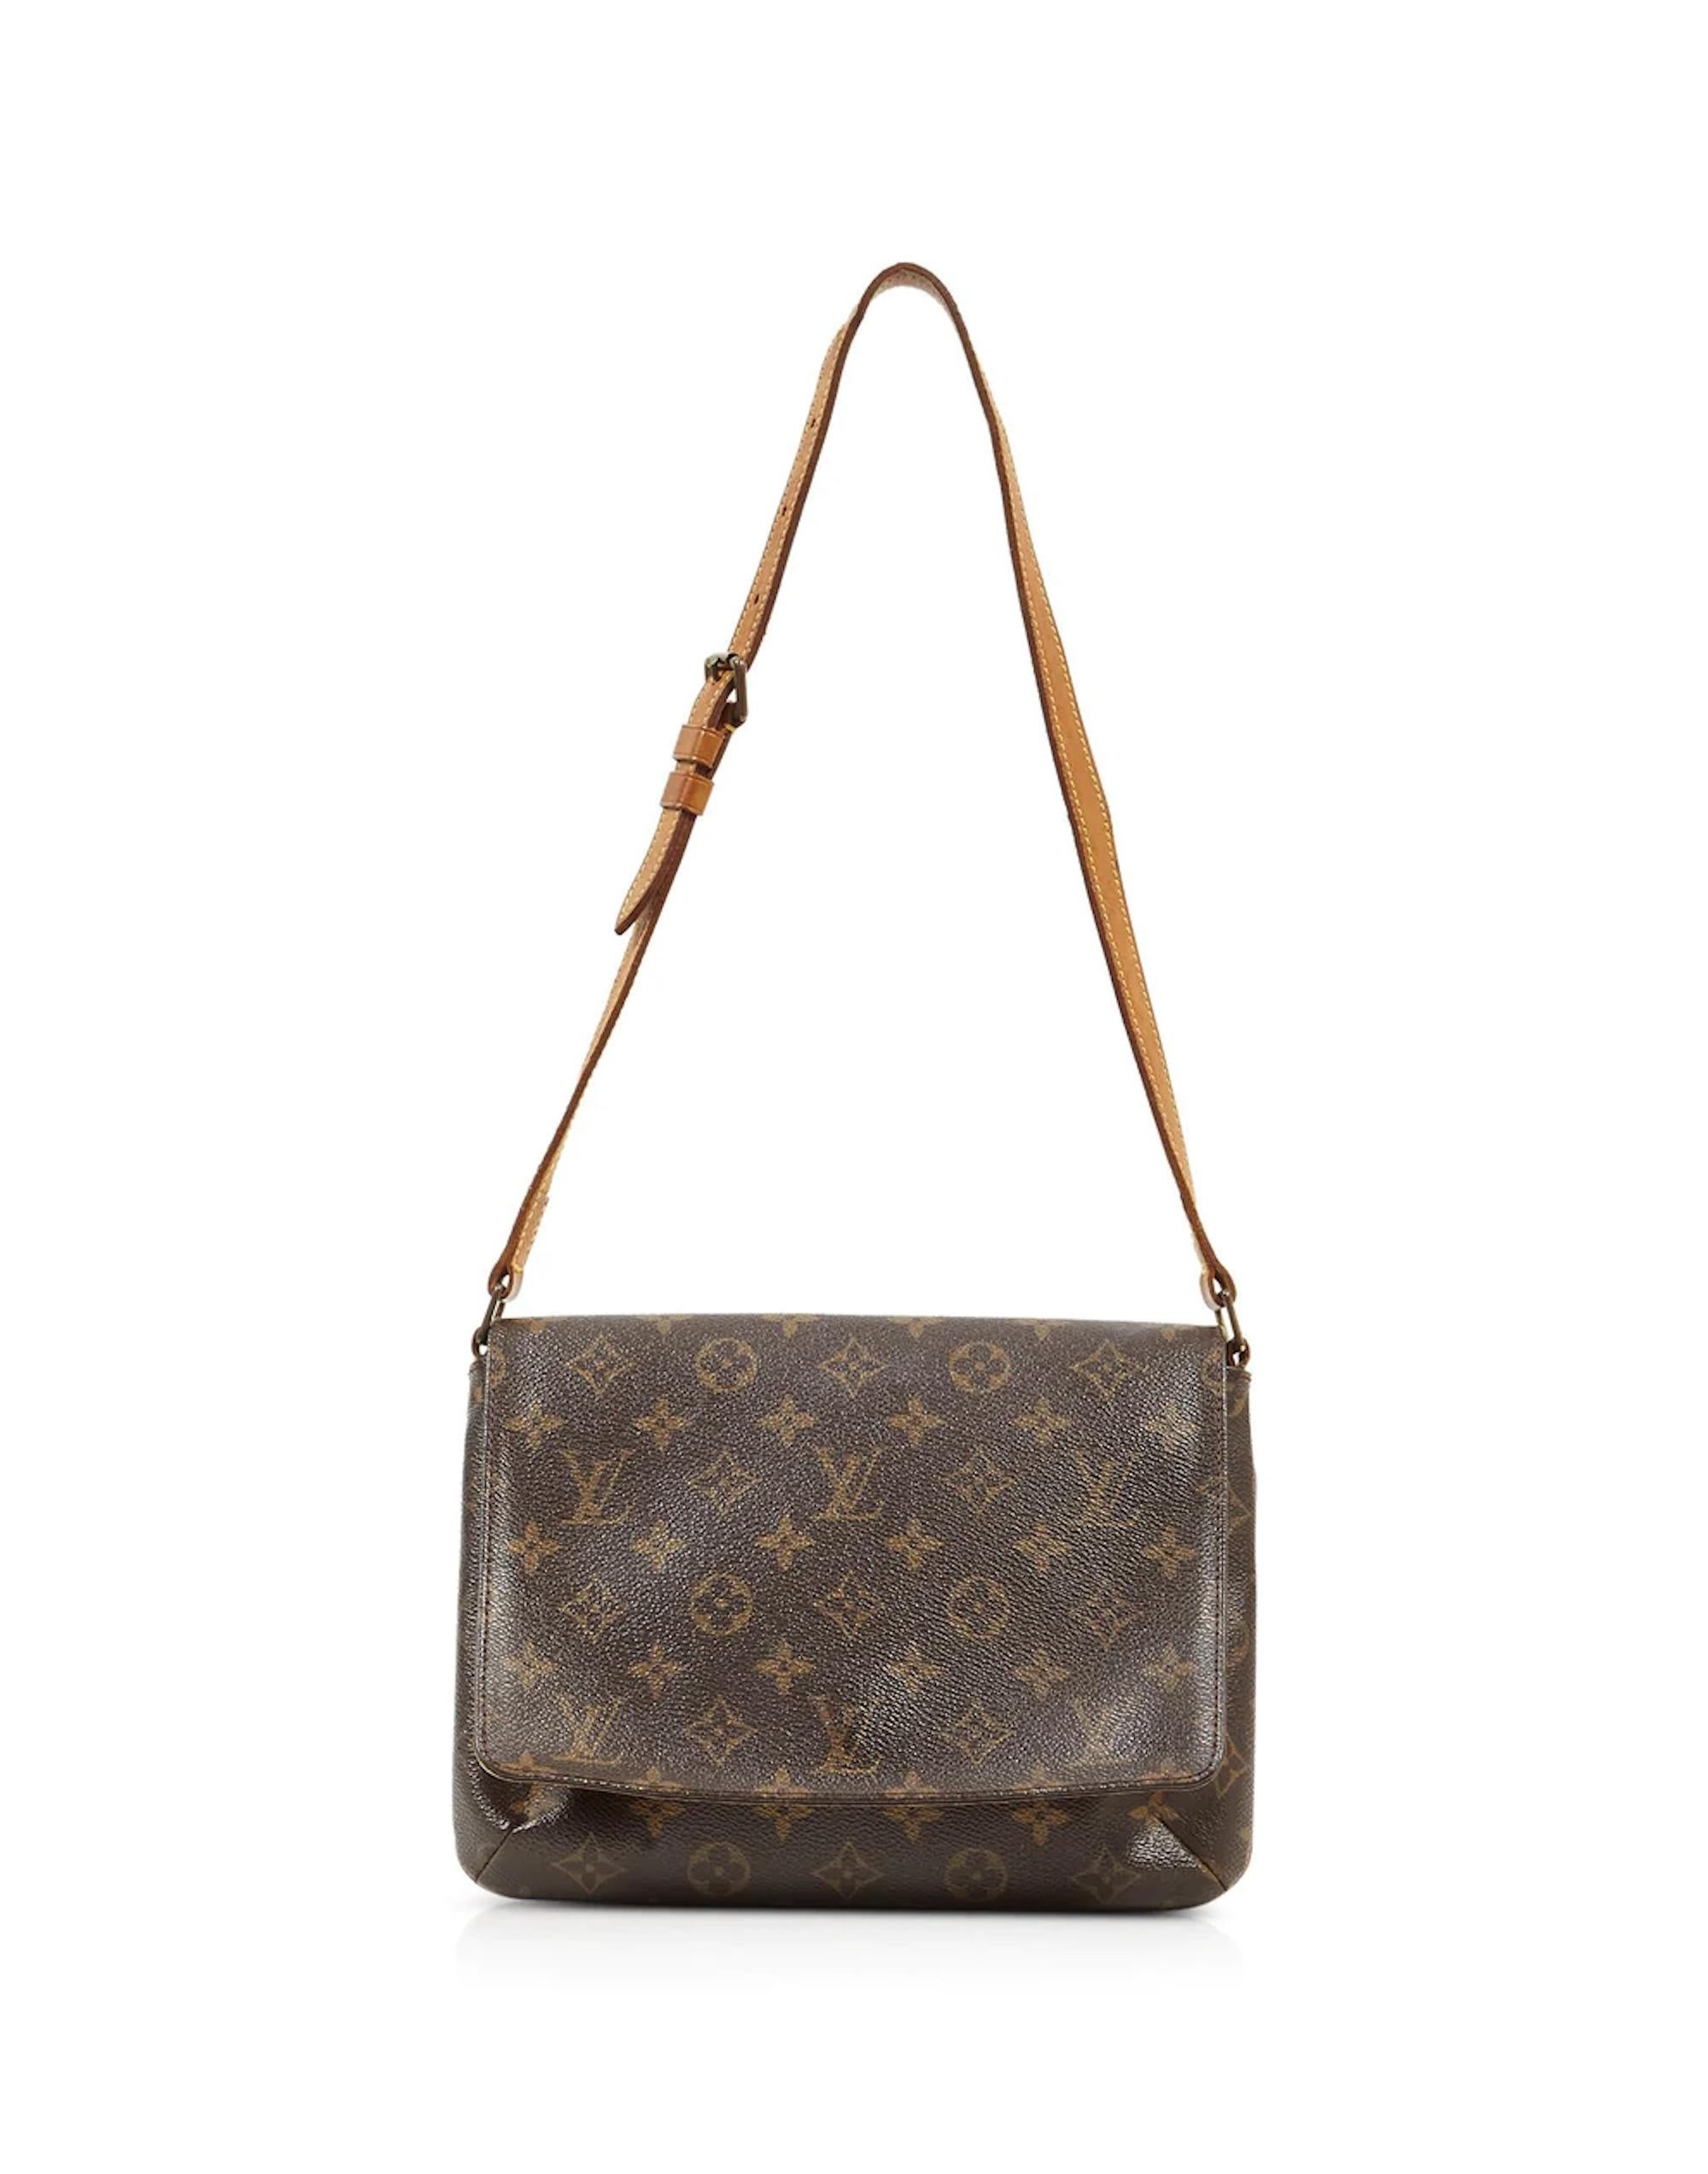 Louis Vuitton Vintage Monogram Musette Tango Shoulder Bags In Good Condition For Sale In Montreal, Quebec